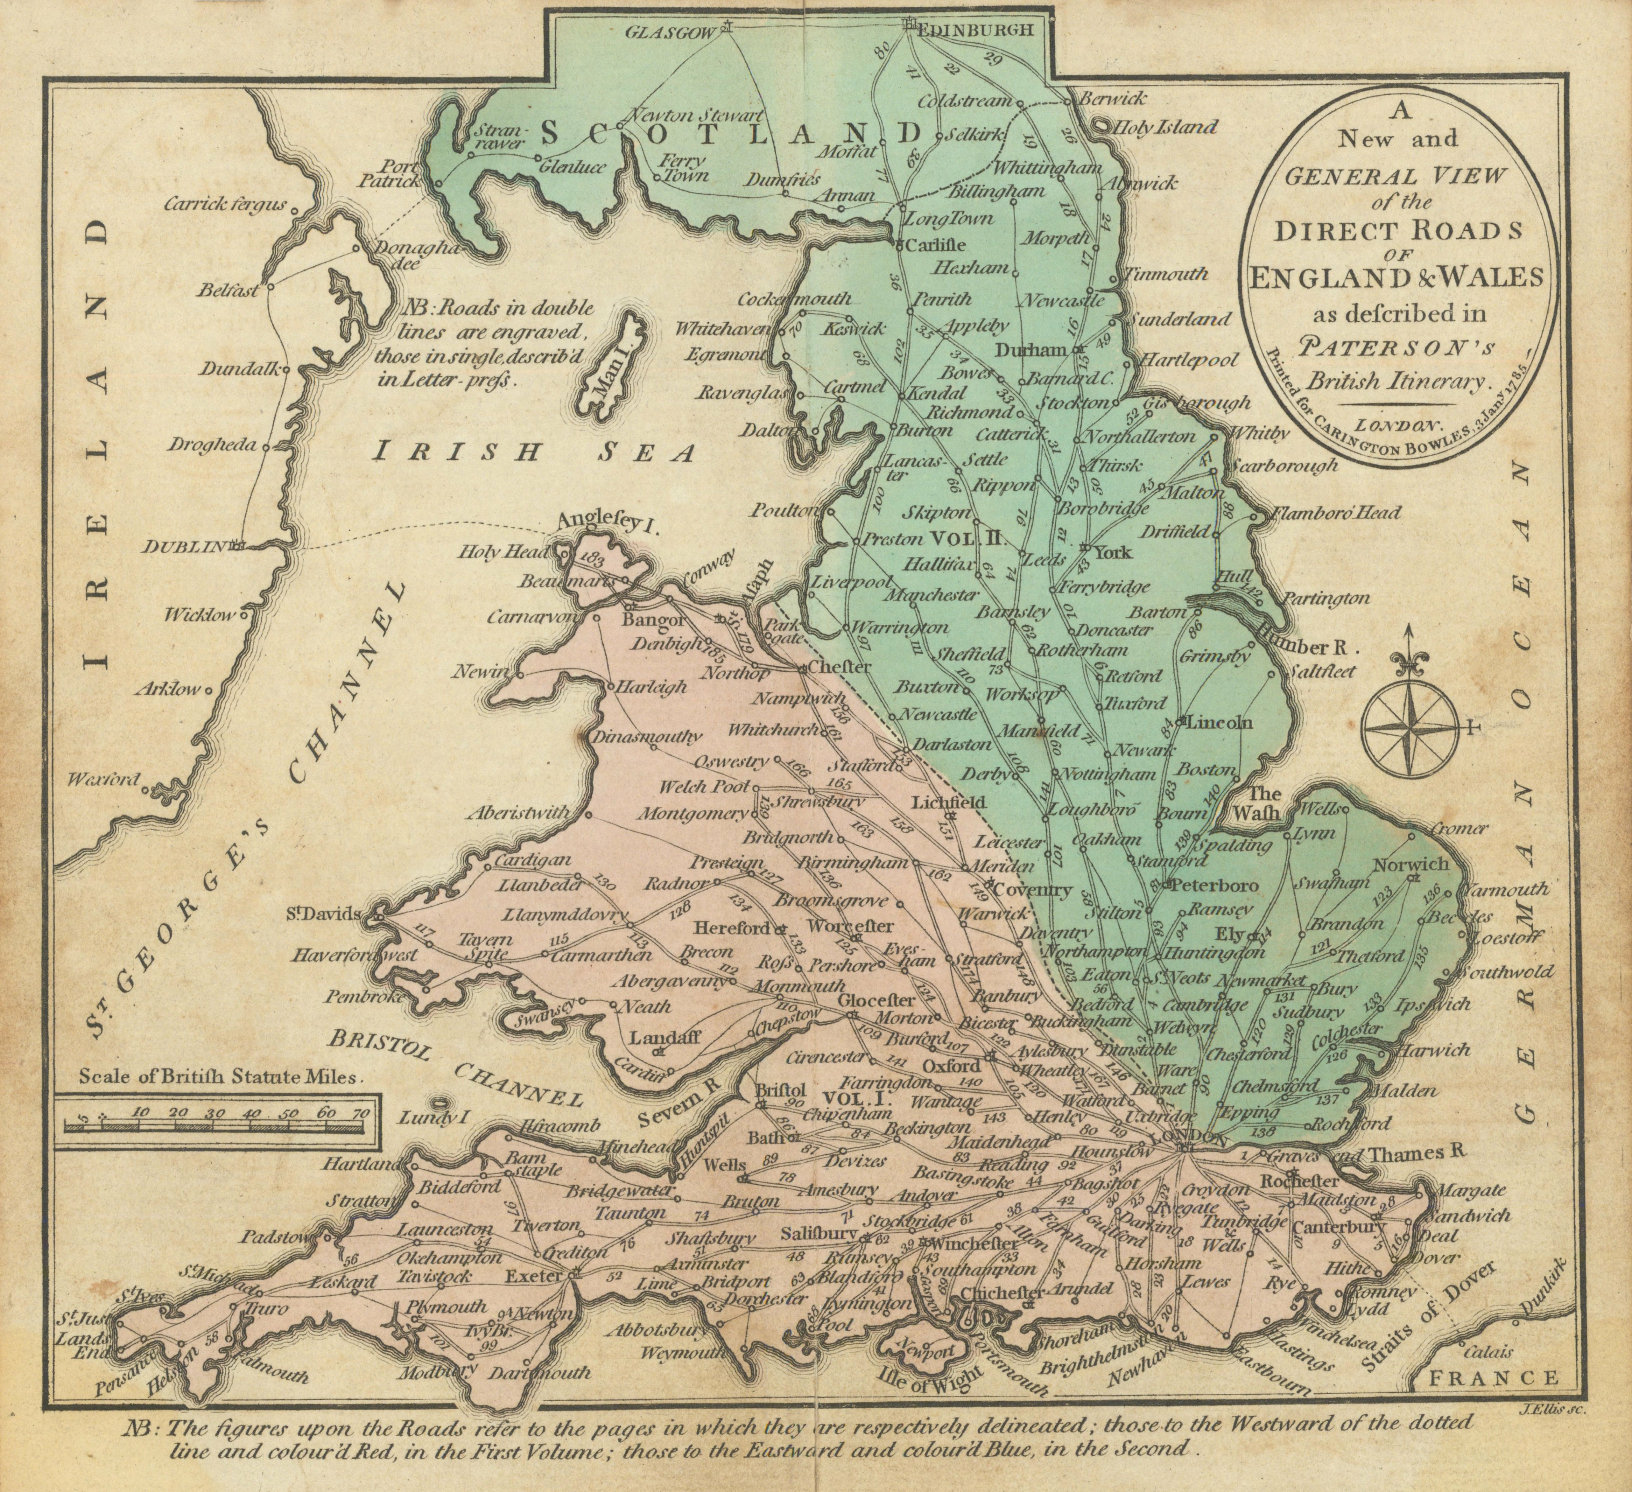 Associate Product A New and General view of the Direct Roads of England & Wales. PATERSON 1785 map